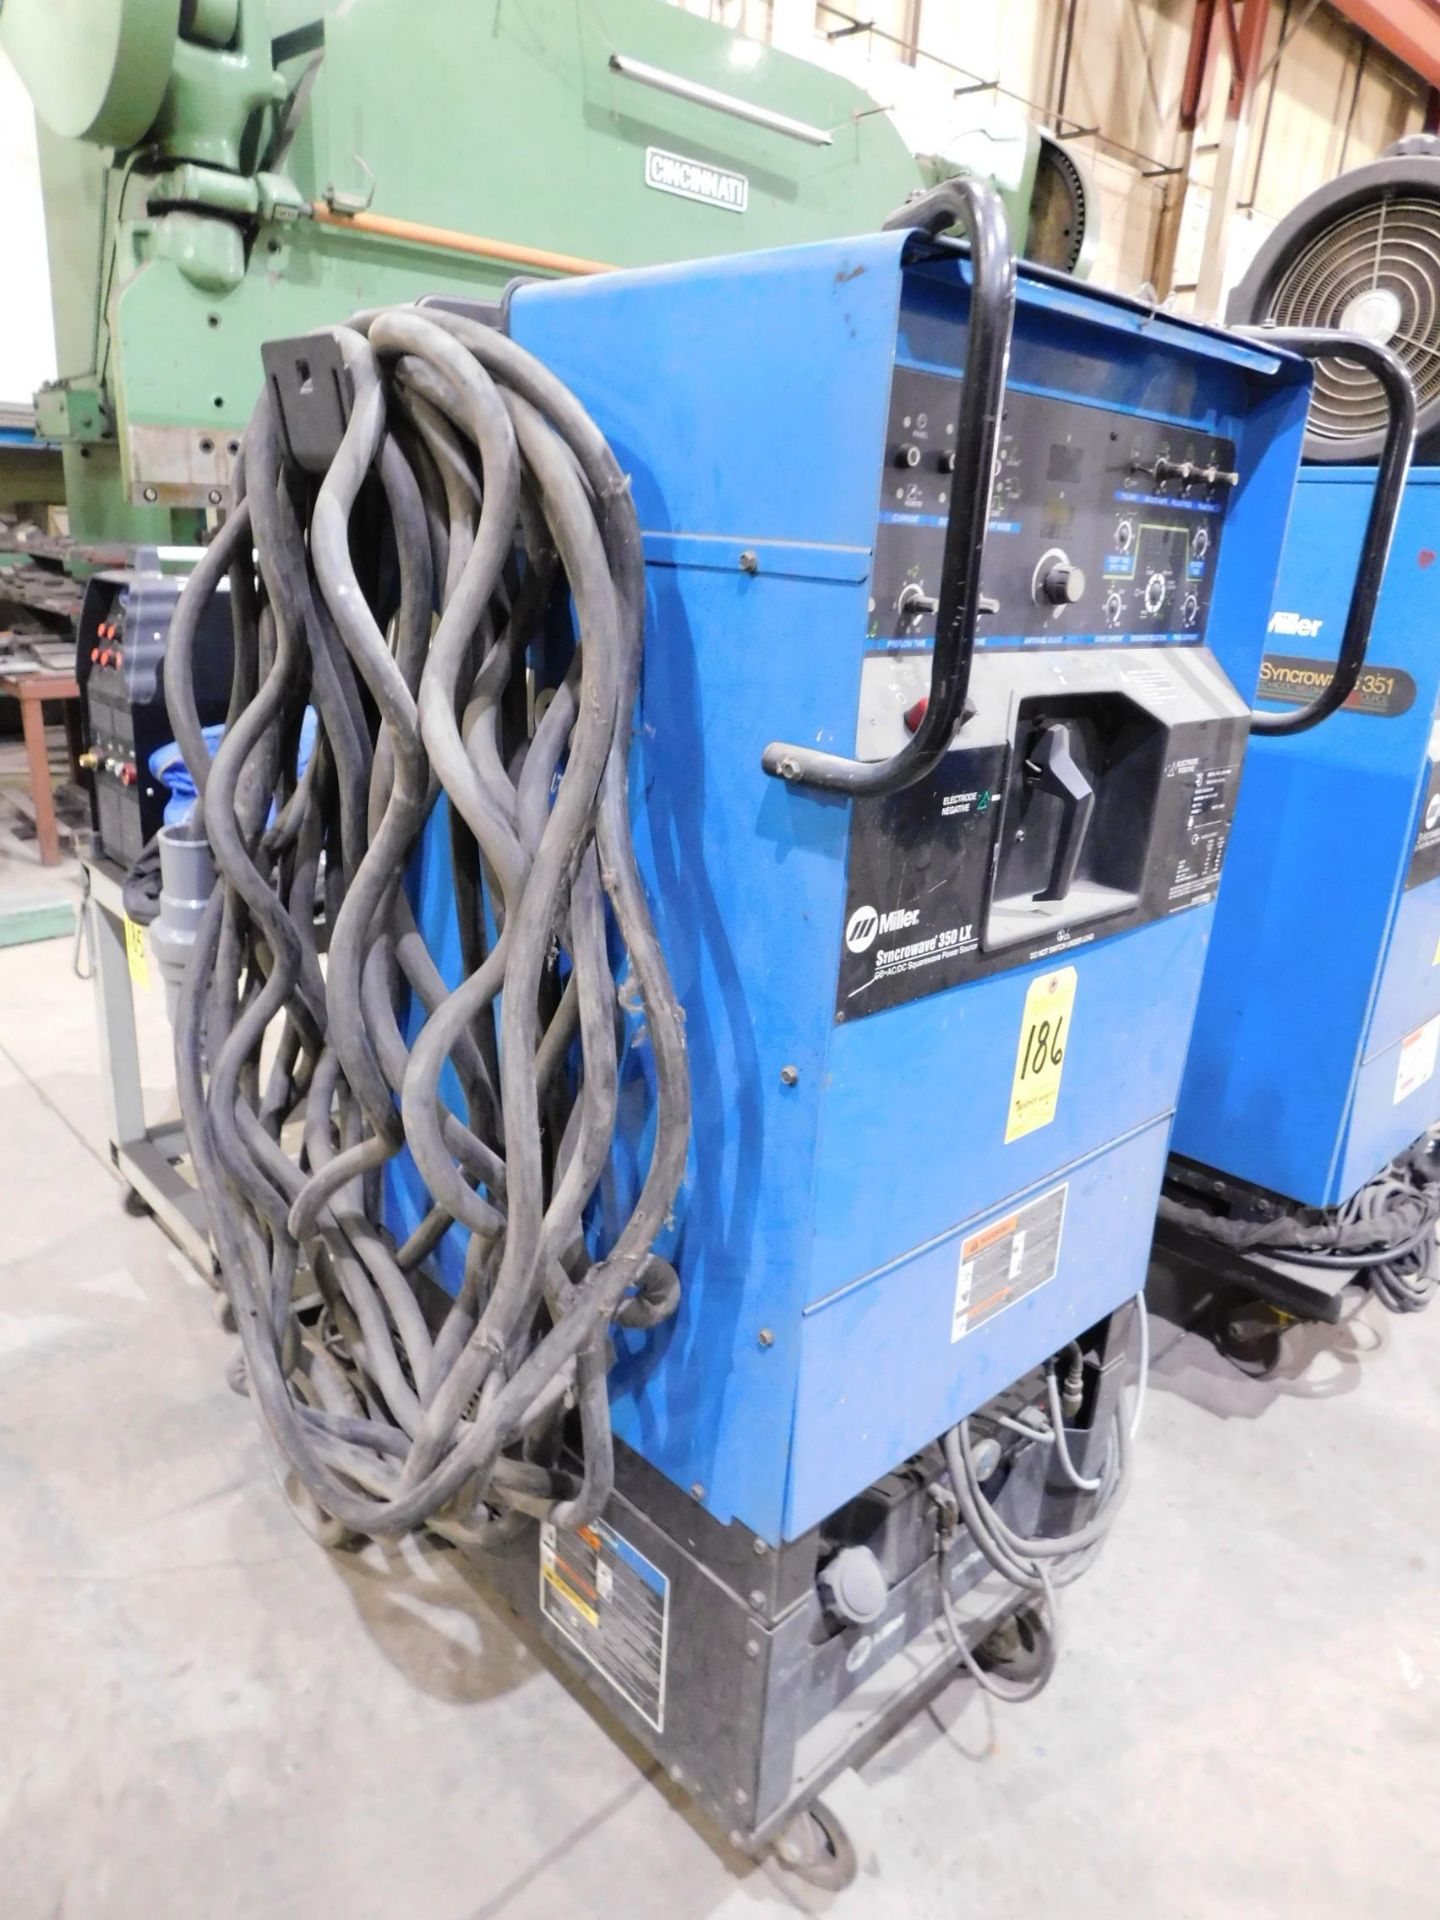 Miller Synchrowave 350LX Tig Welder, s/n LB294456, with Built in Chiller, Torch Ground Cable, - Image 3 of 7